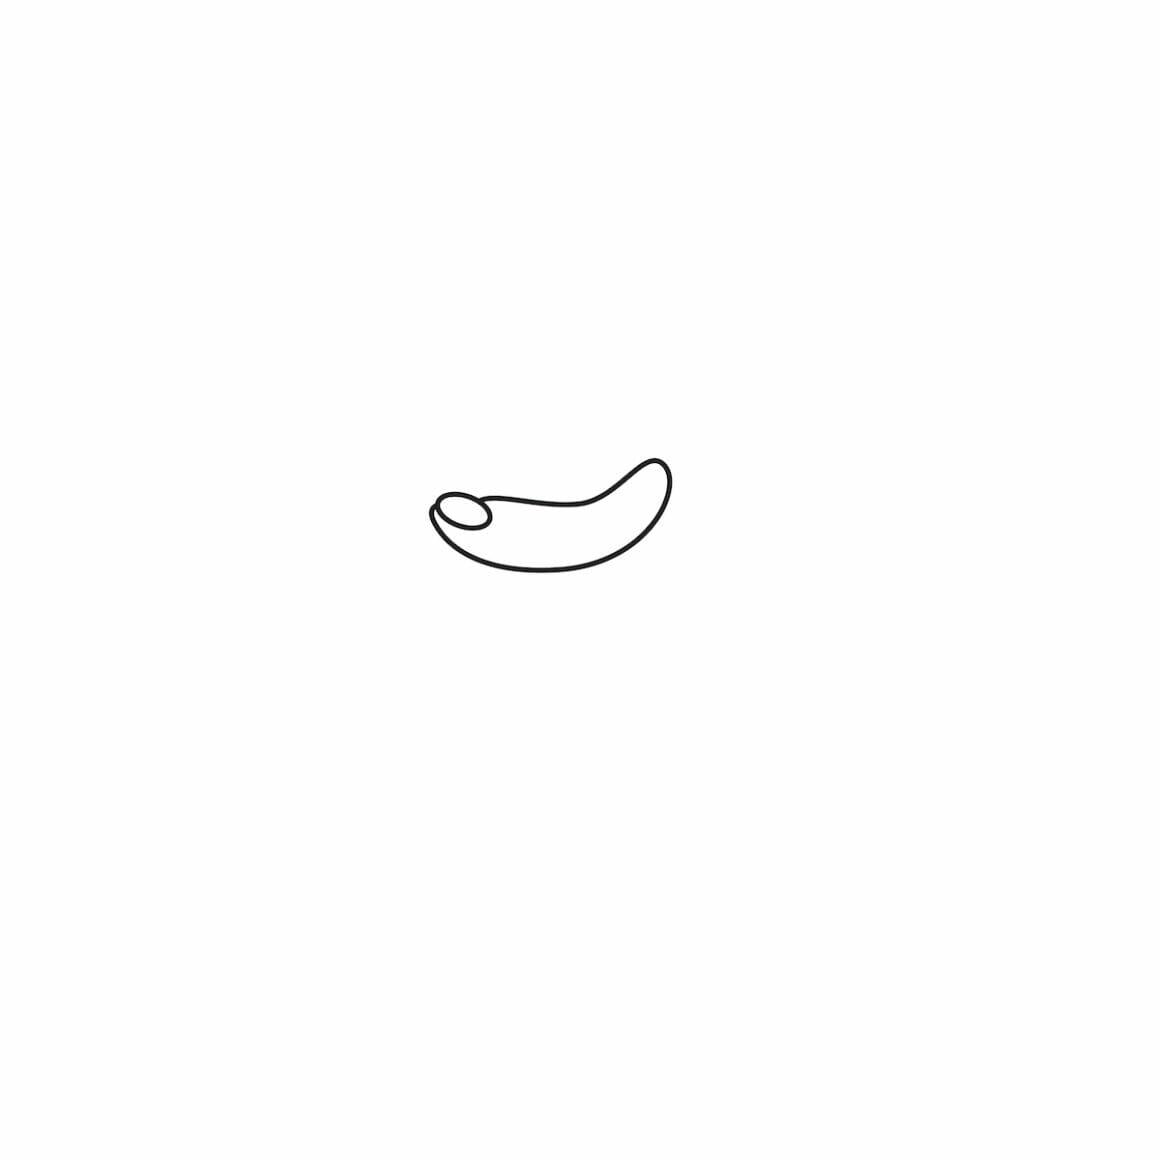 Draw a Banana Shape with a Nose